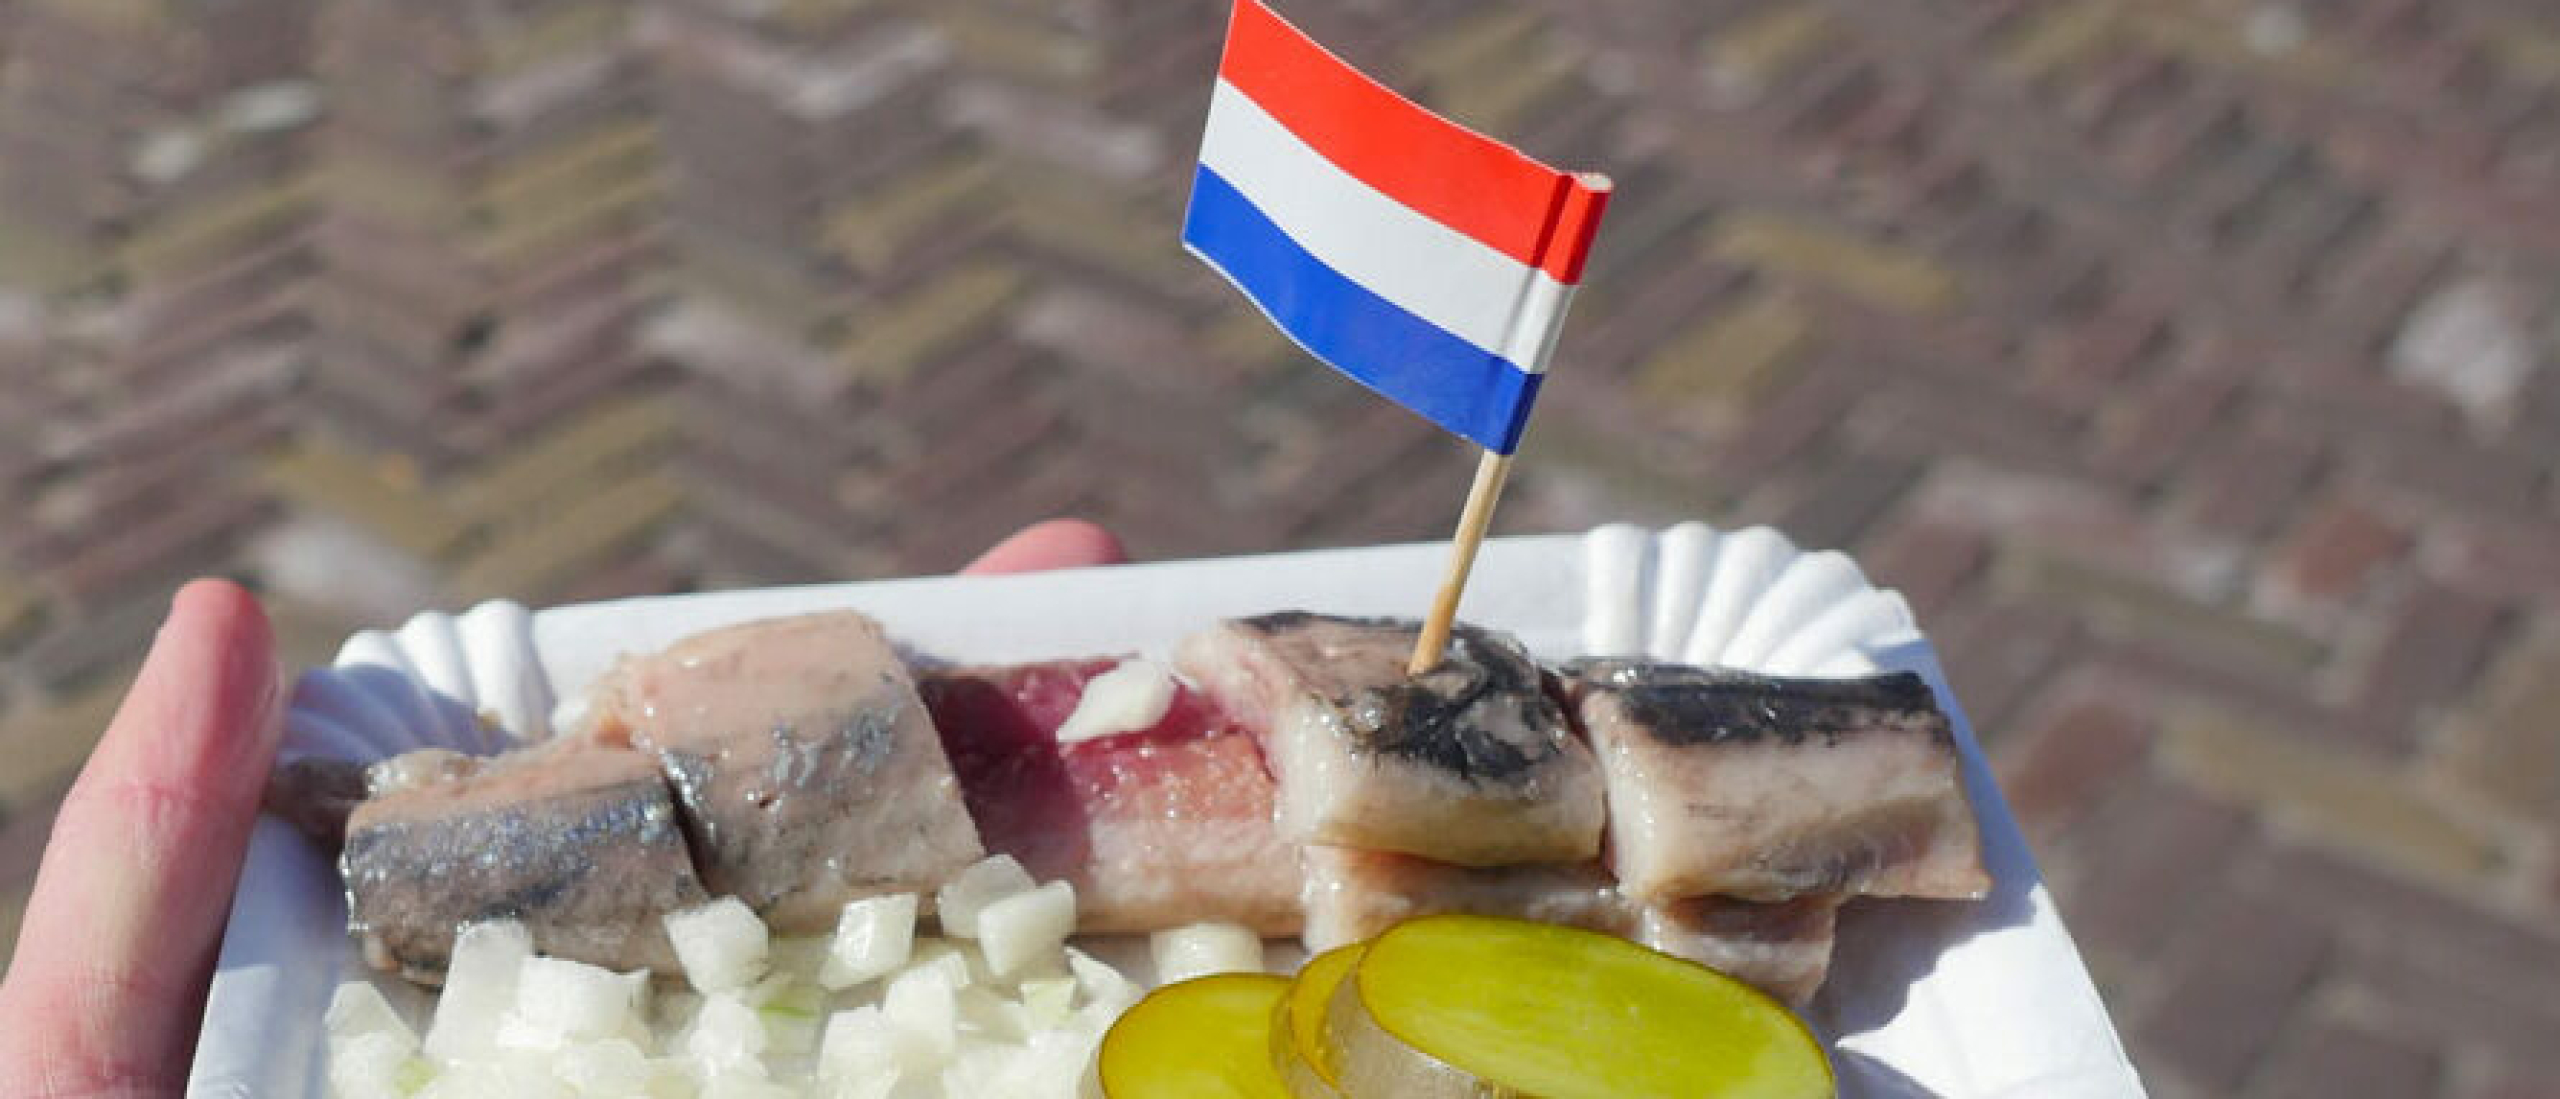 Savoring The Netherlands: A Culinary Expedition Through Dutch Delights